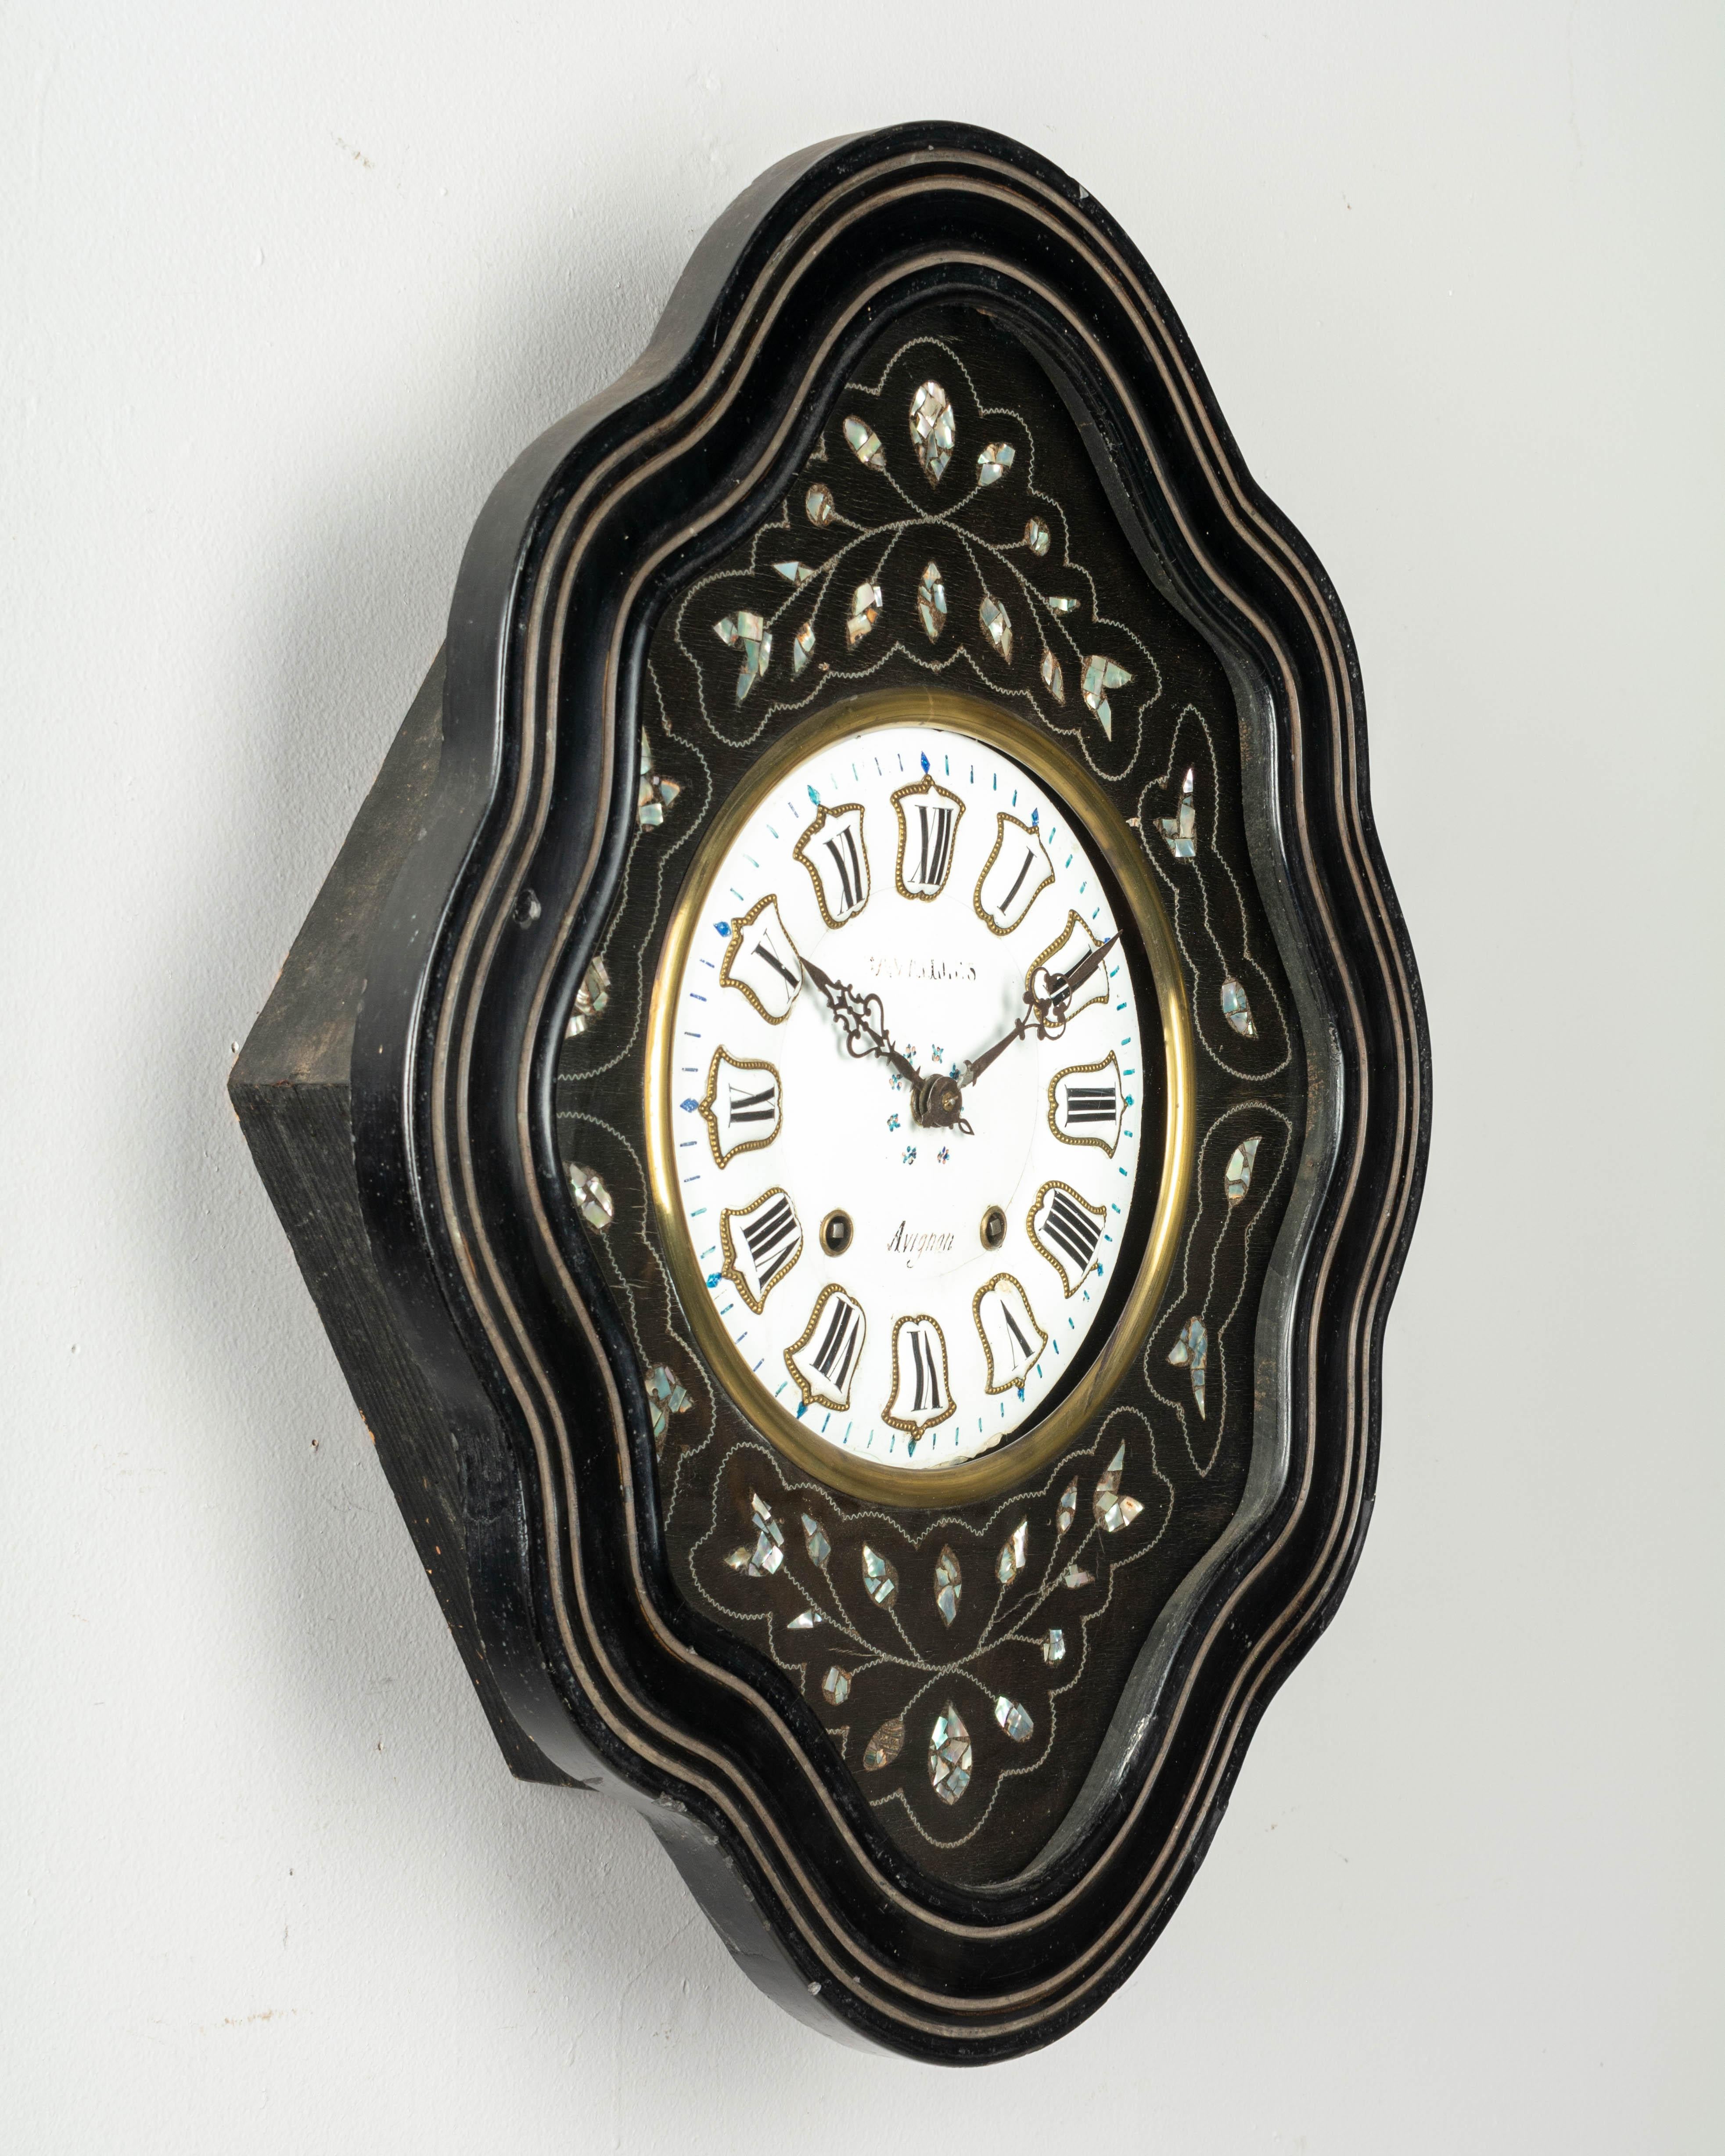 A 19th century French Napoleon III wall clock from Avignon with 